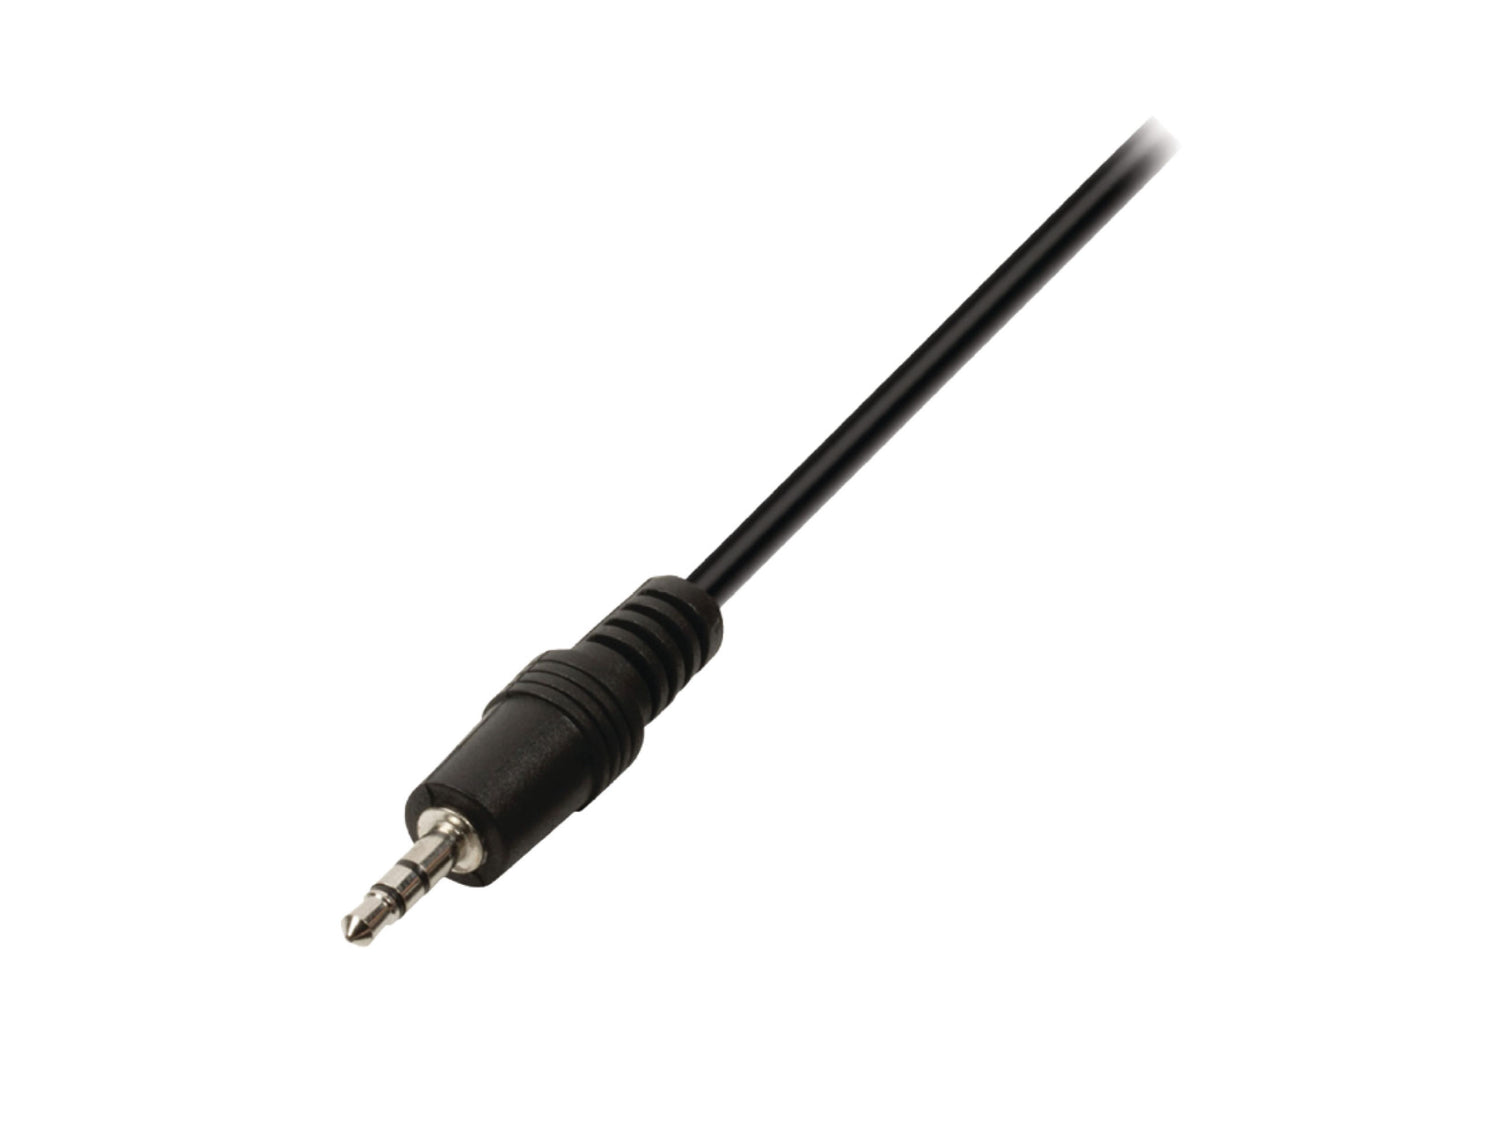 3.5mm connection